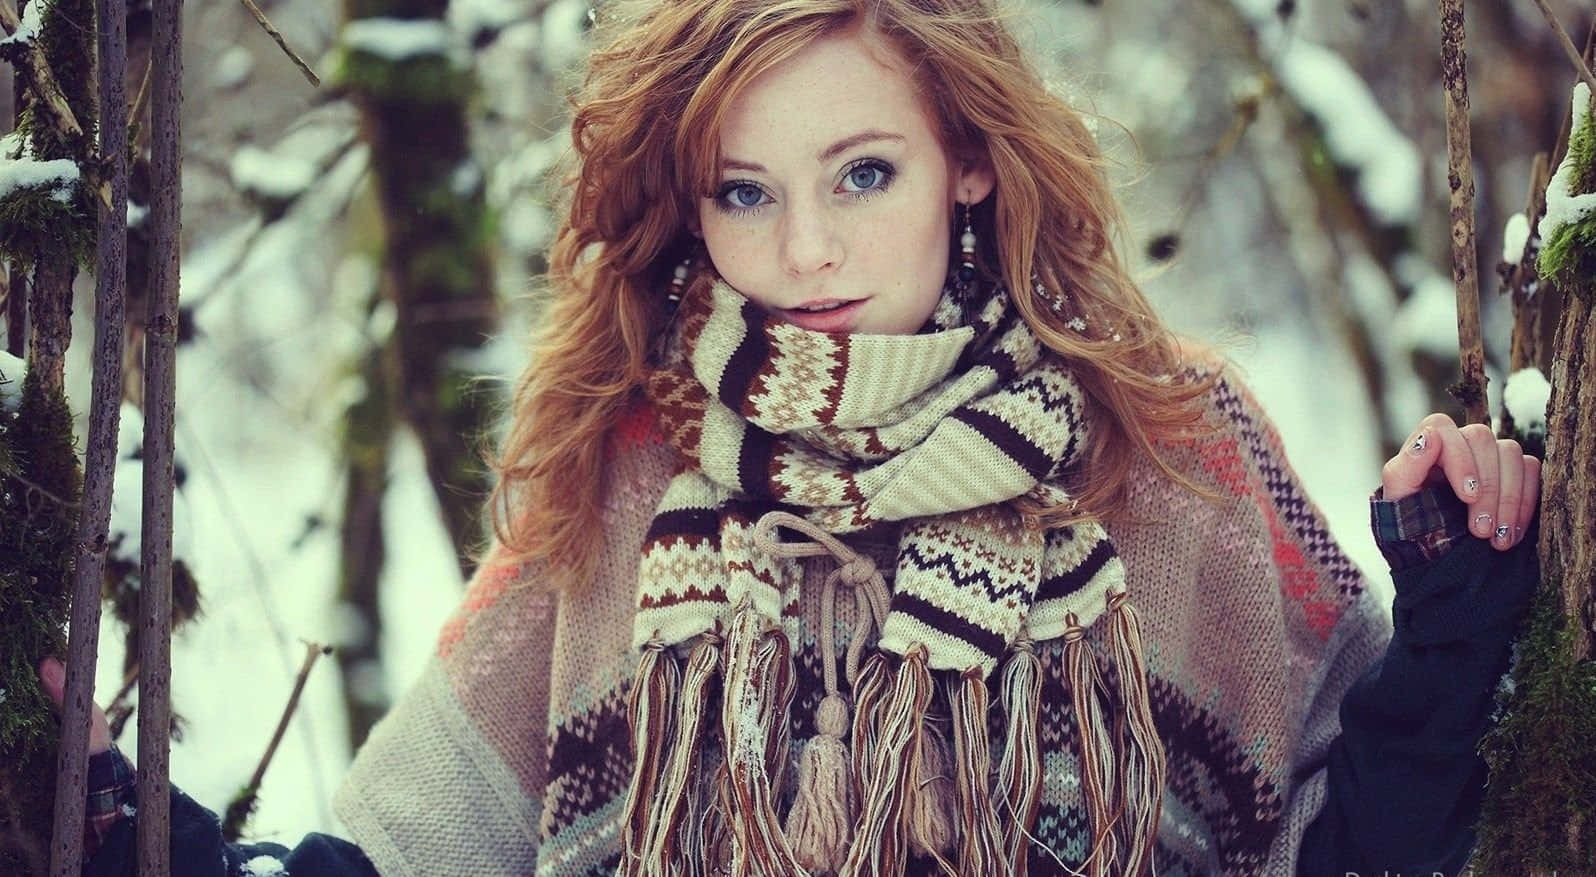 Stylish woman in winter outfit enjoying the snow Wallpaper